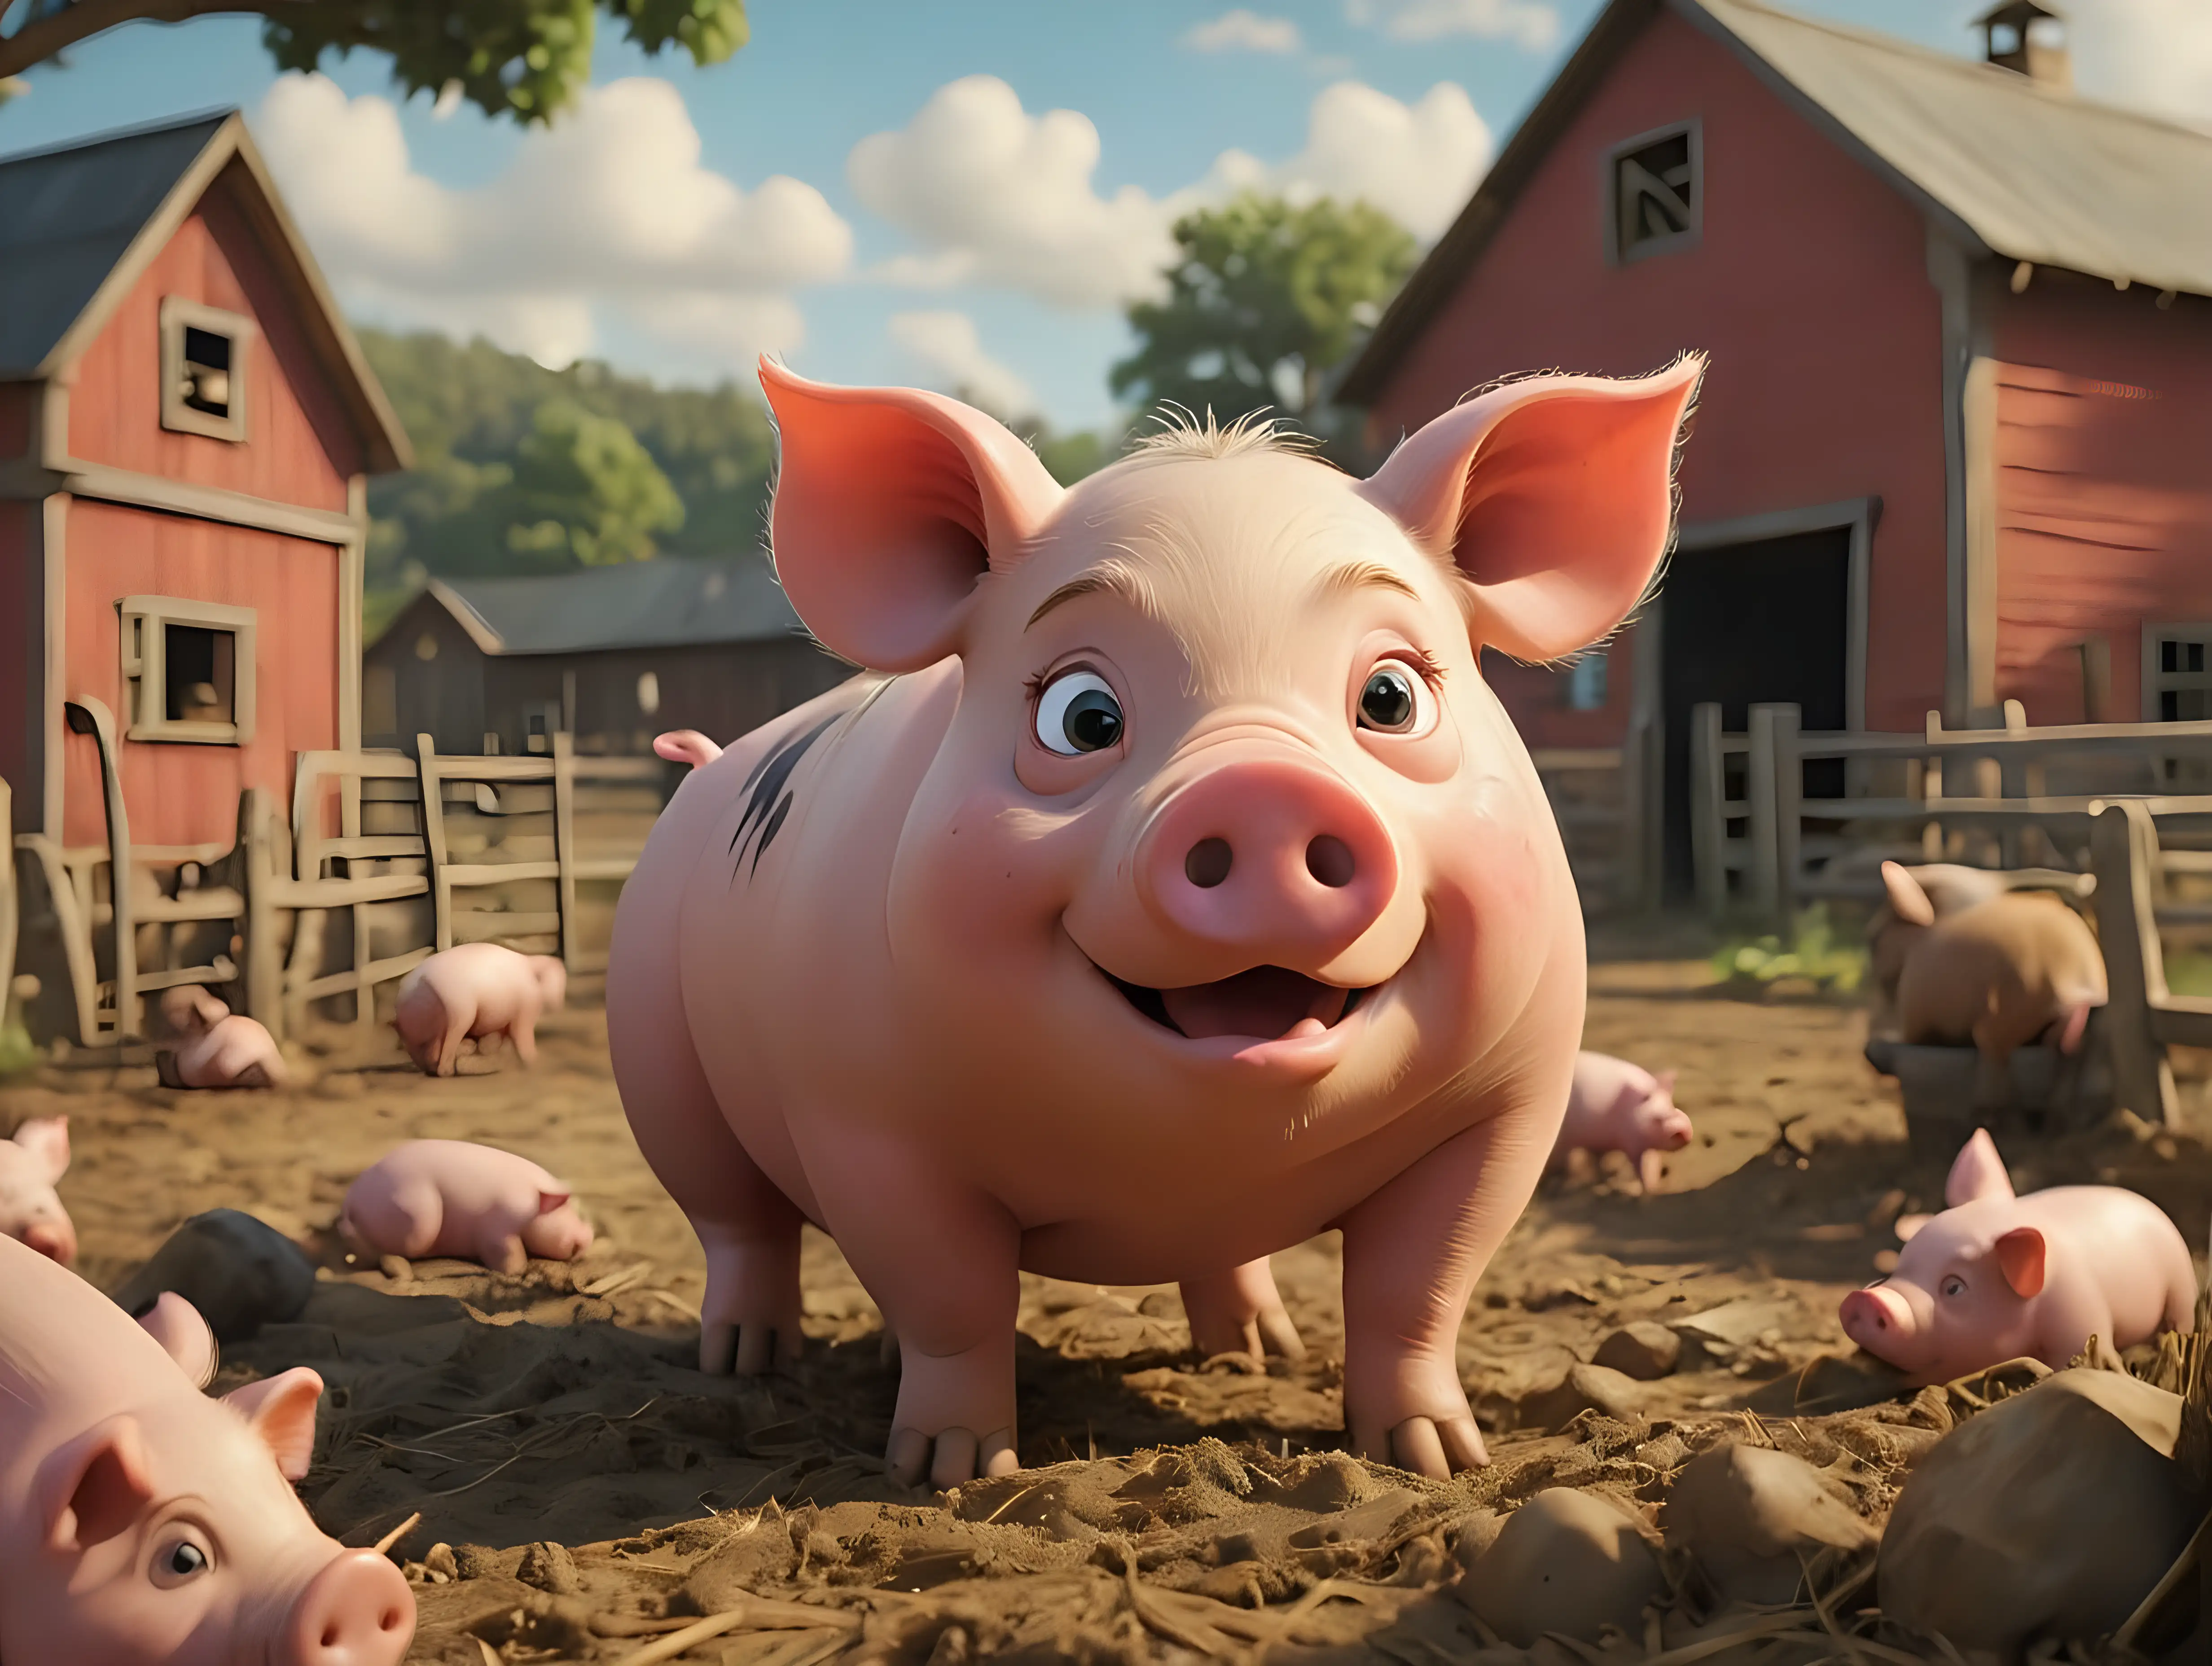 Pig-on-a-Farm-with-Disneyinspired-3D-Background